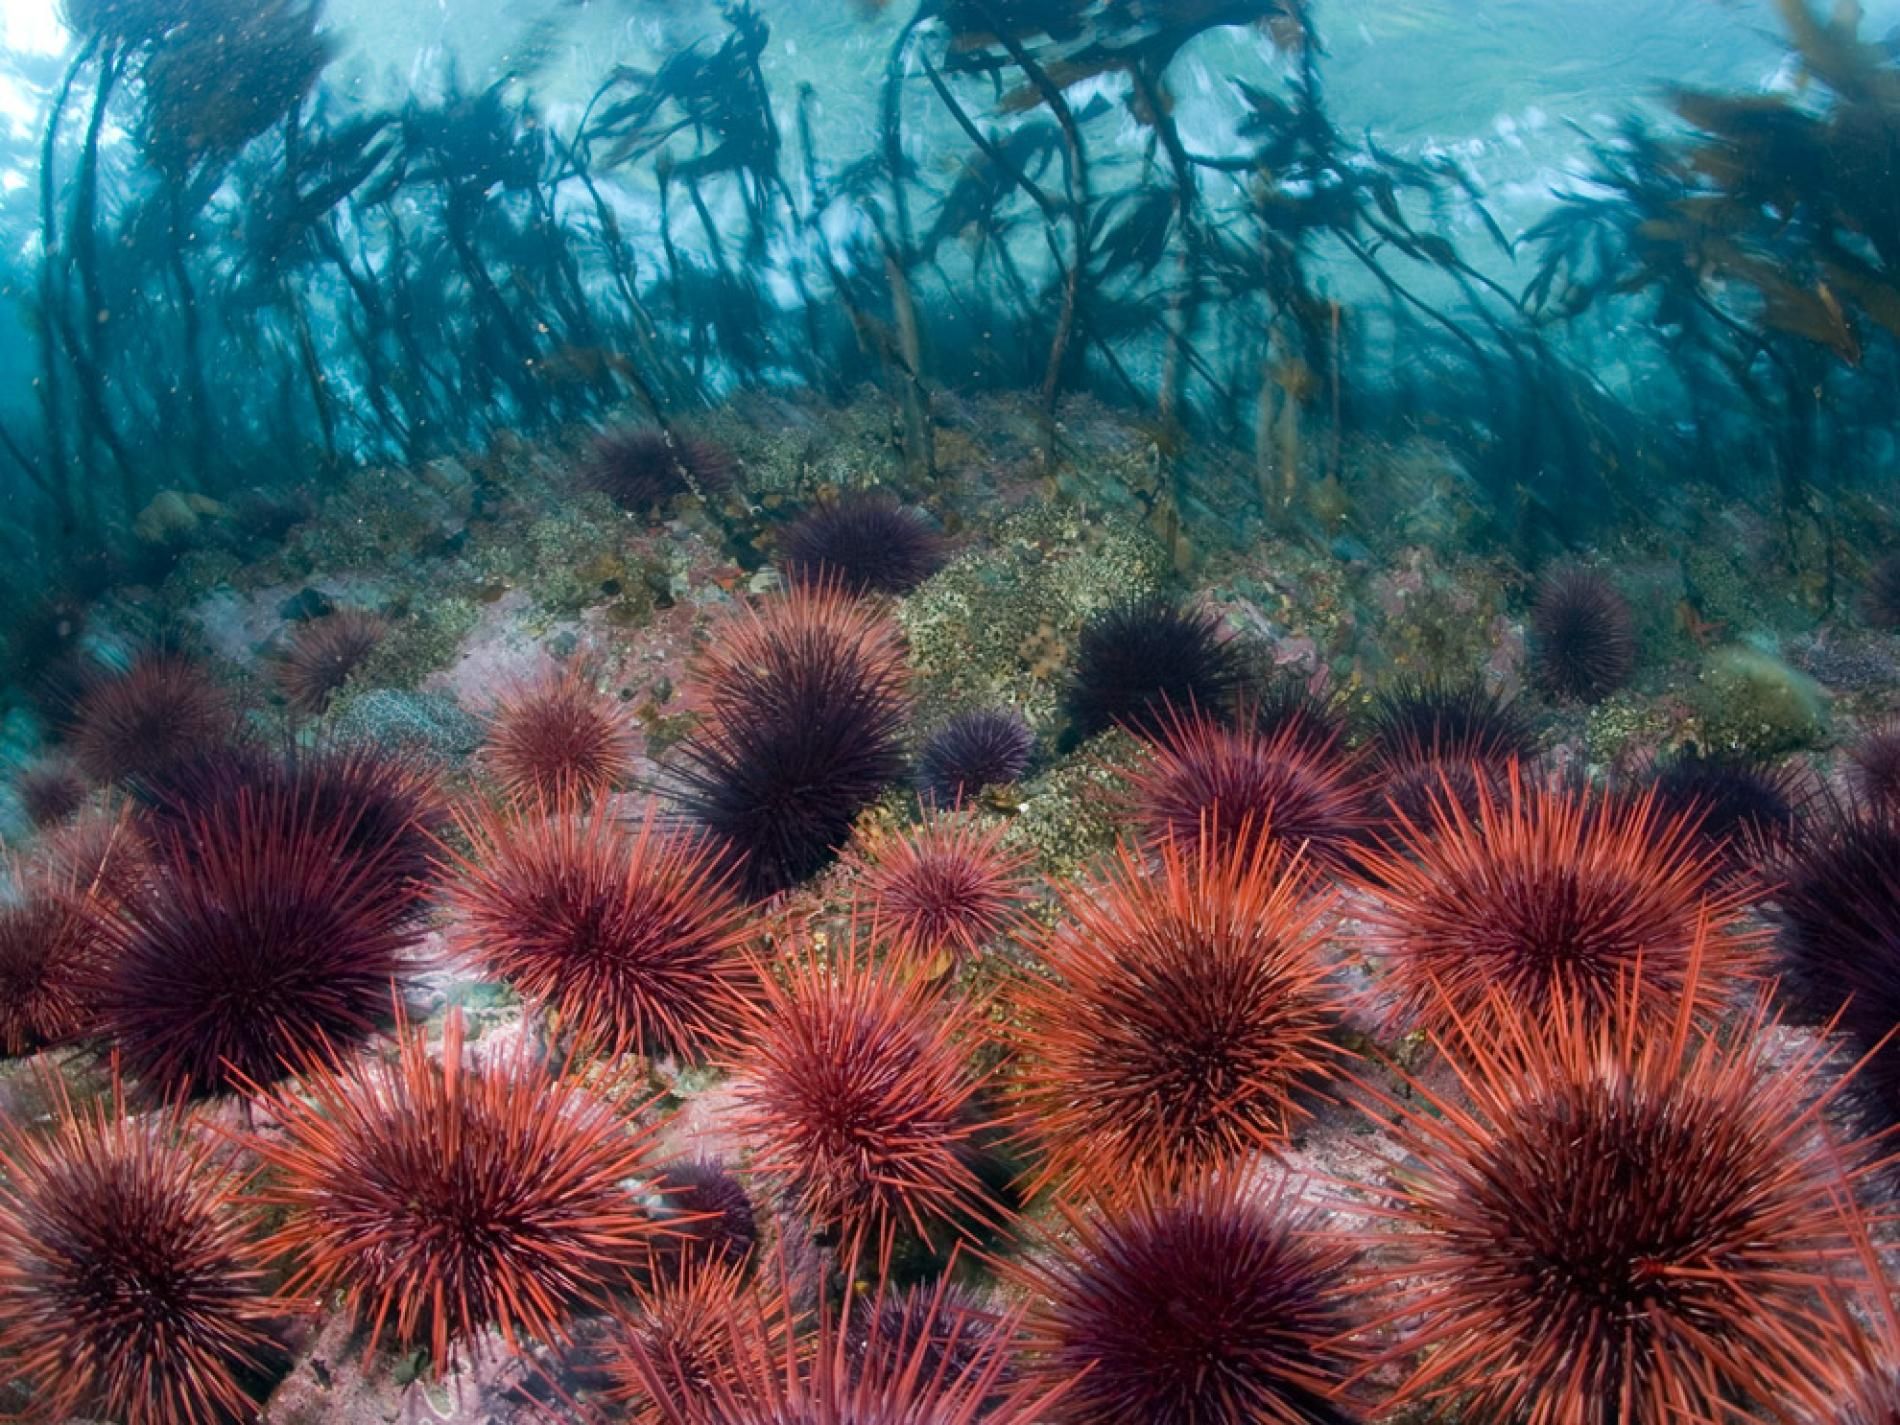 Physical Appearance of Sea Urchins